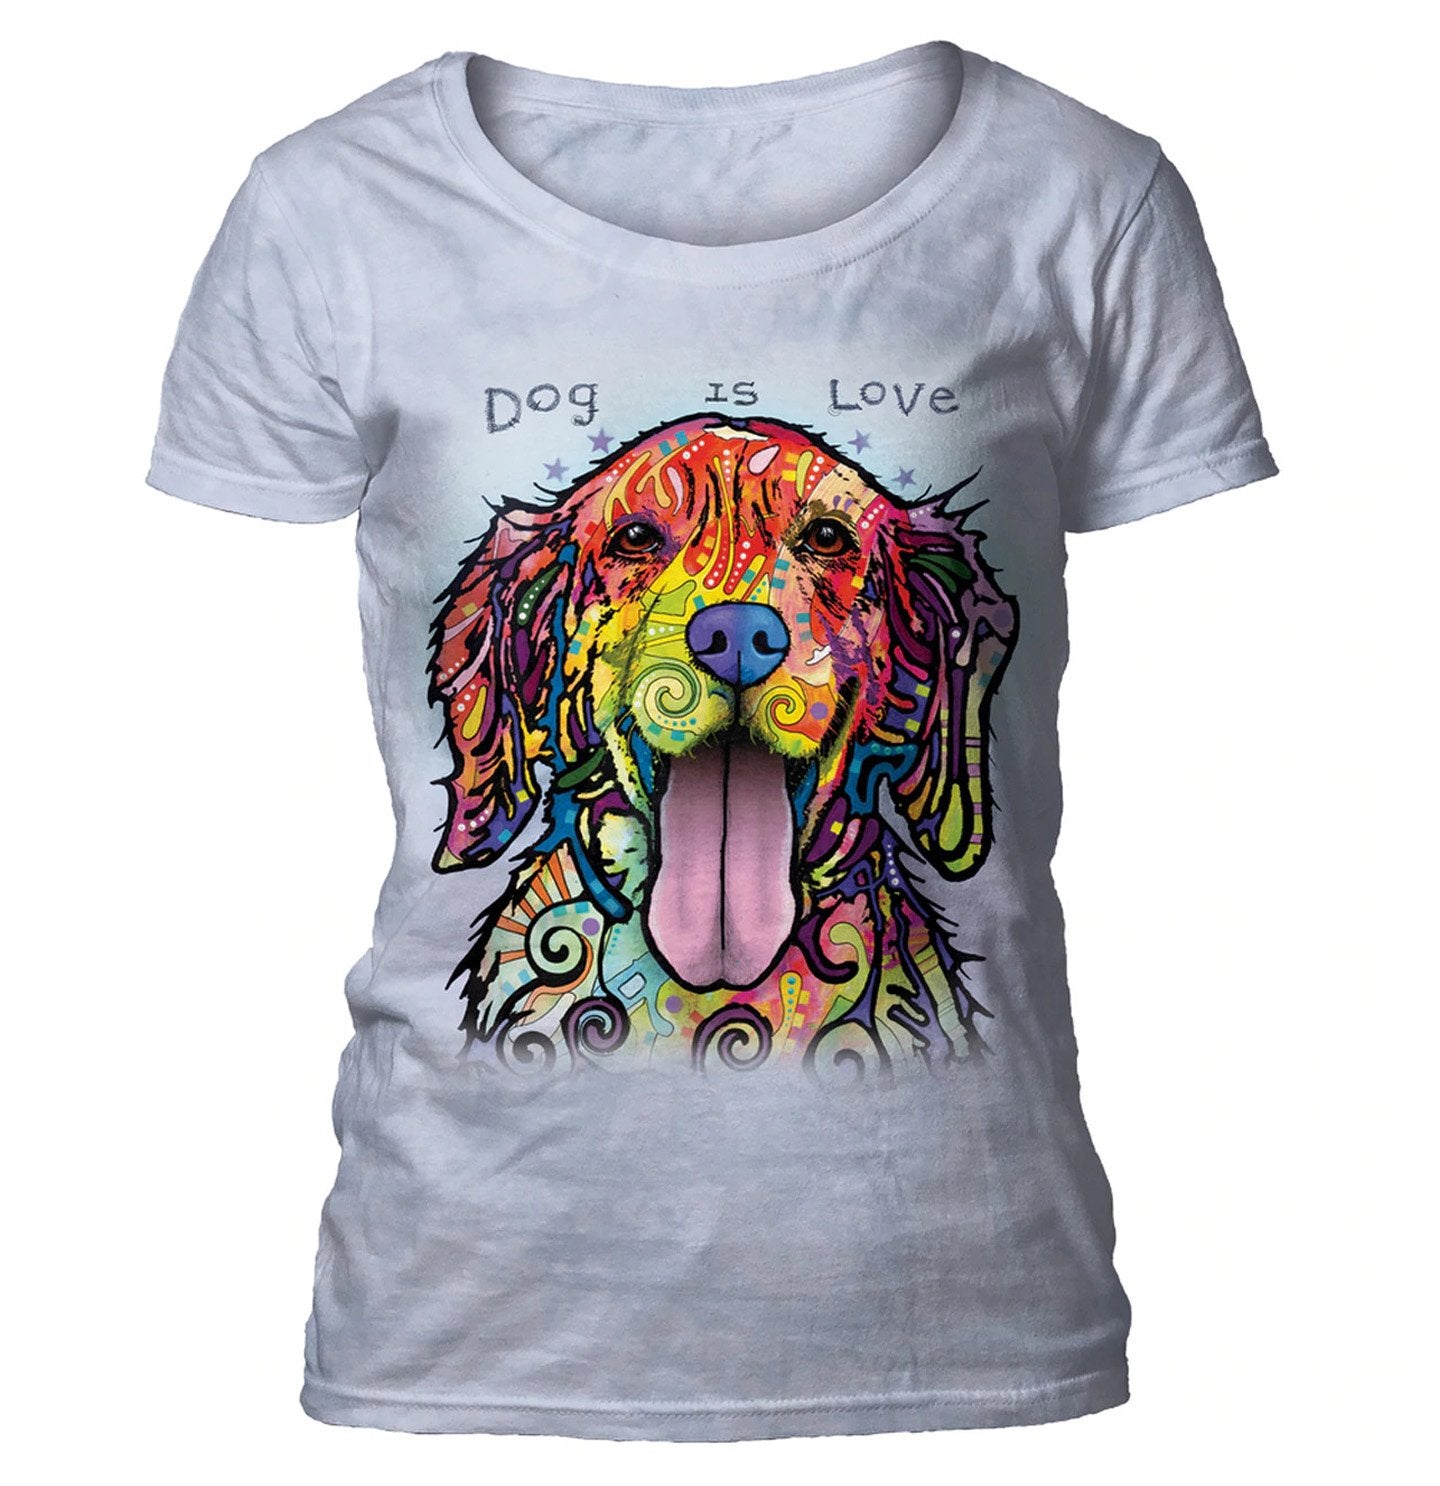 The Mountain - Dog Is Love - Women's Scoop Neck T-Shirt